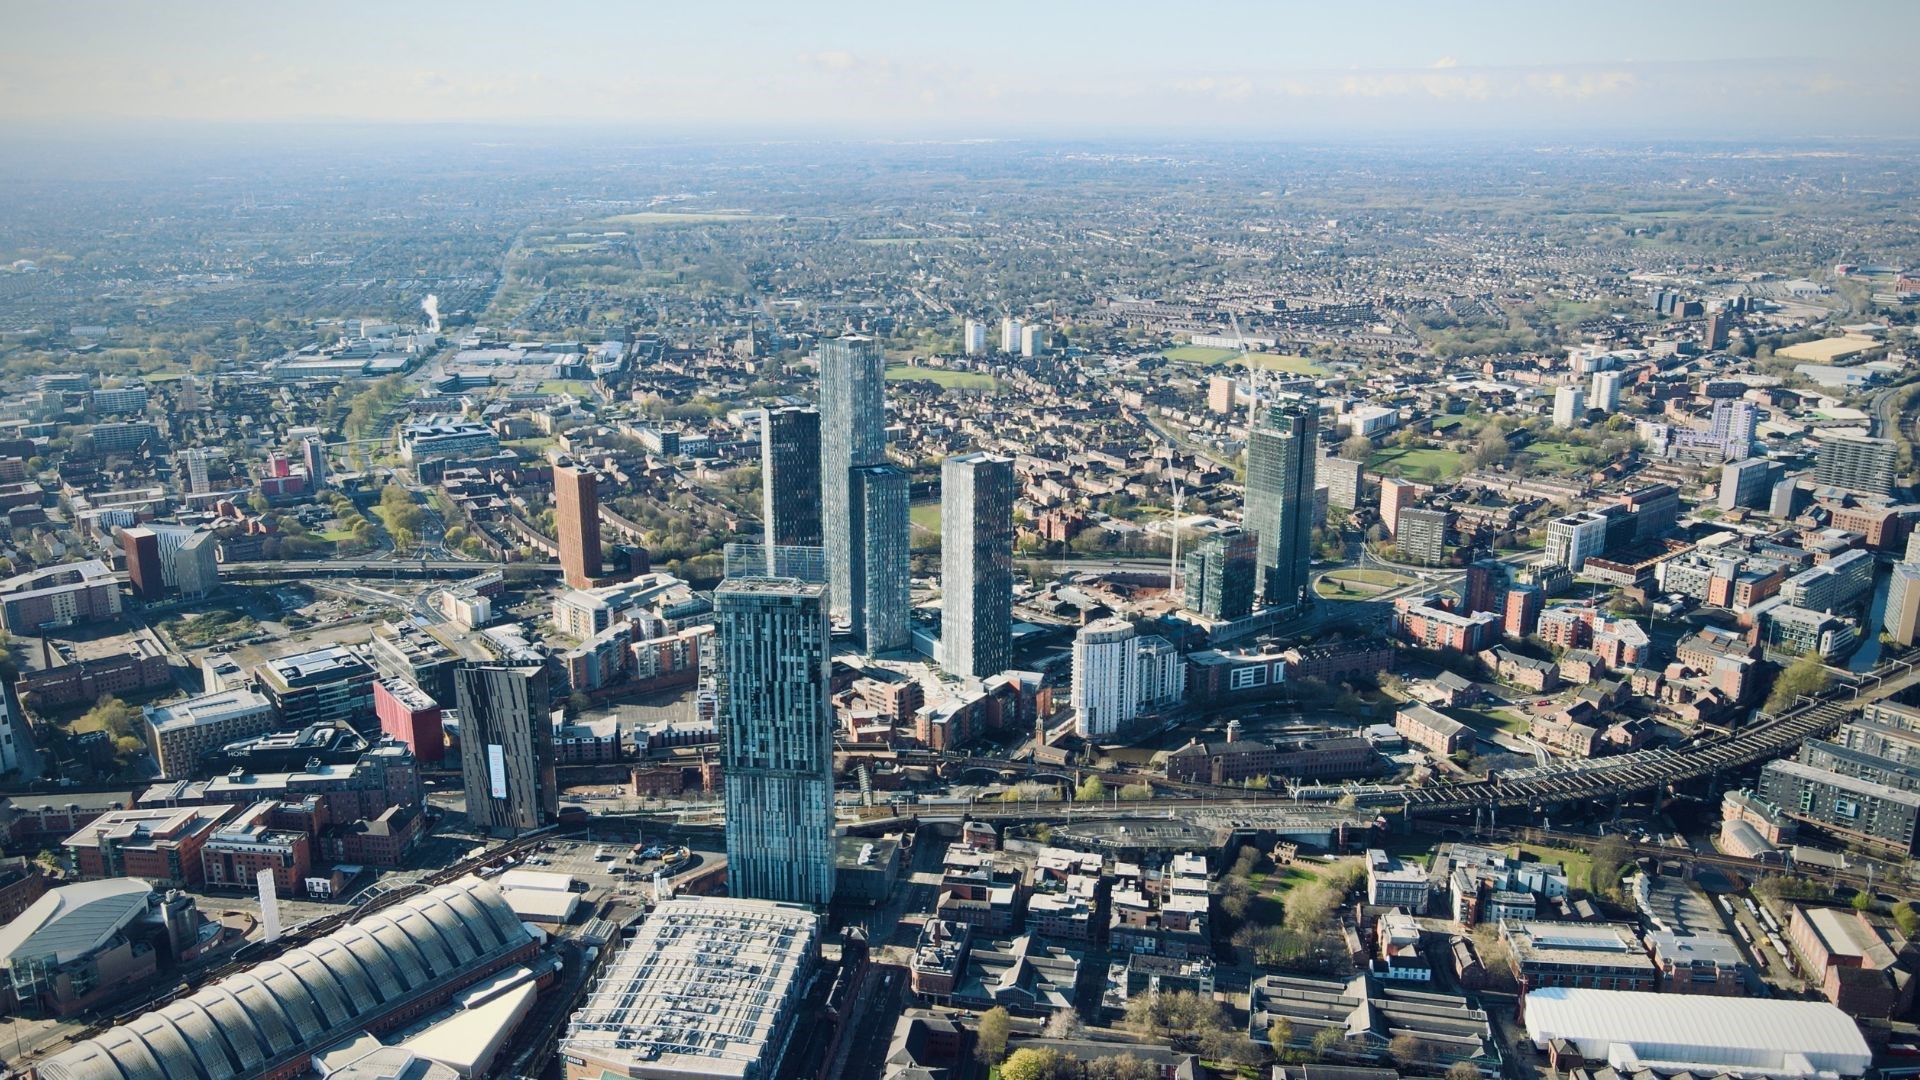 An aerial view of the city of manchester